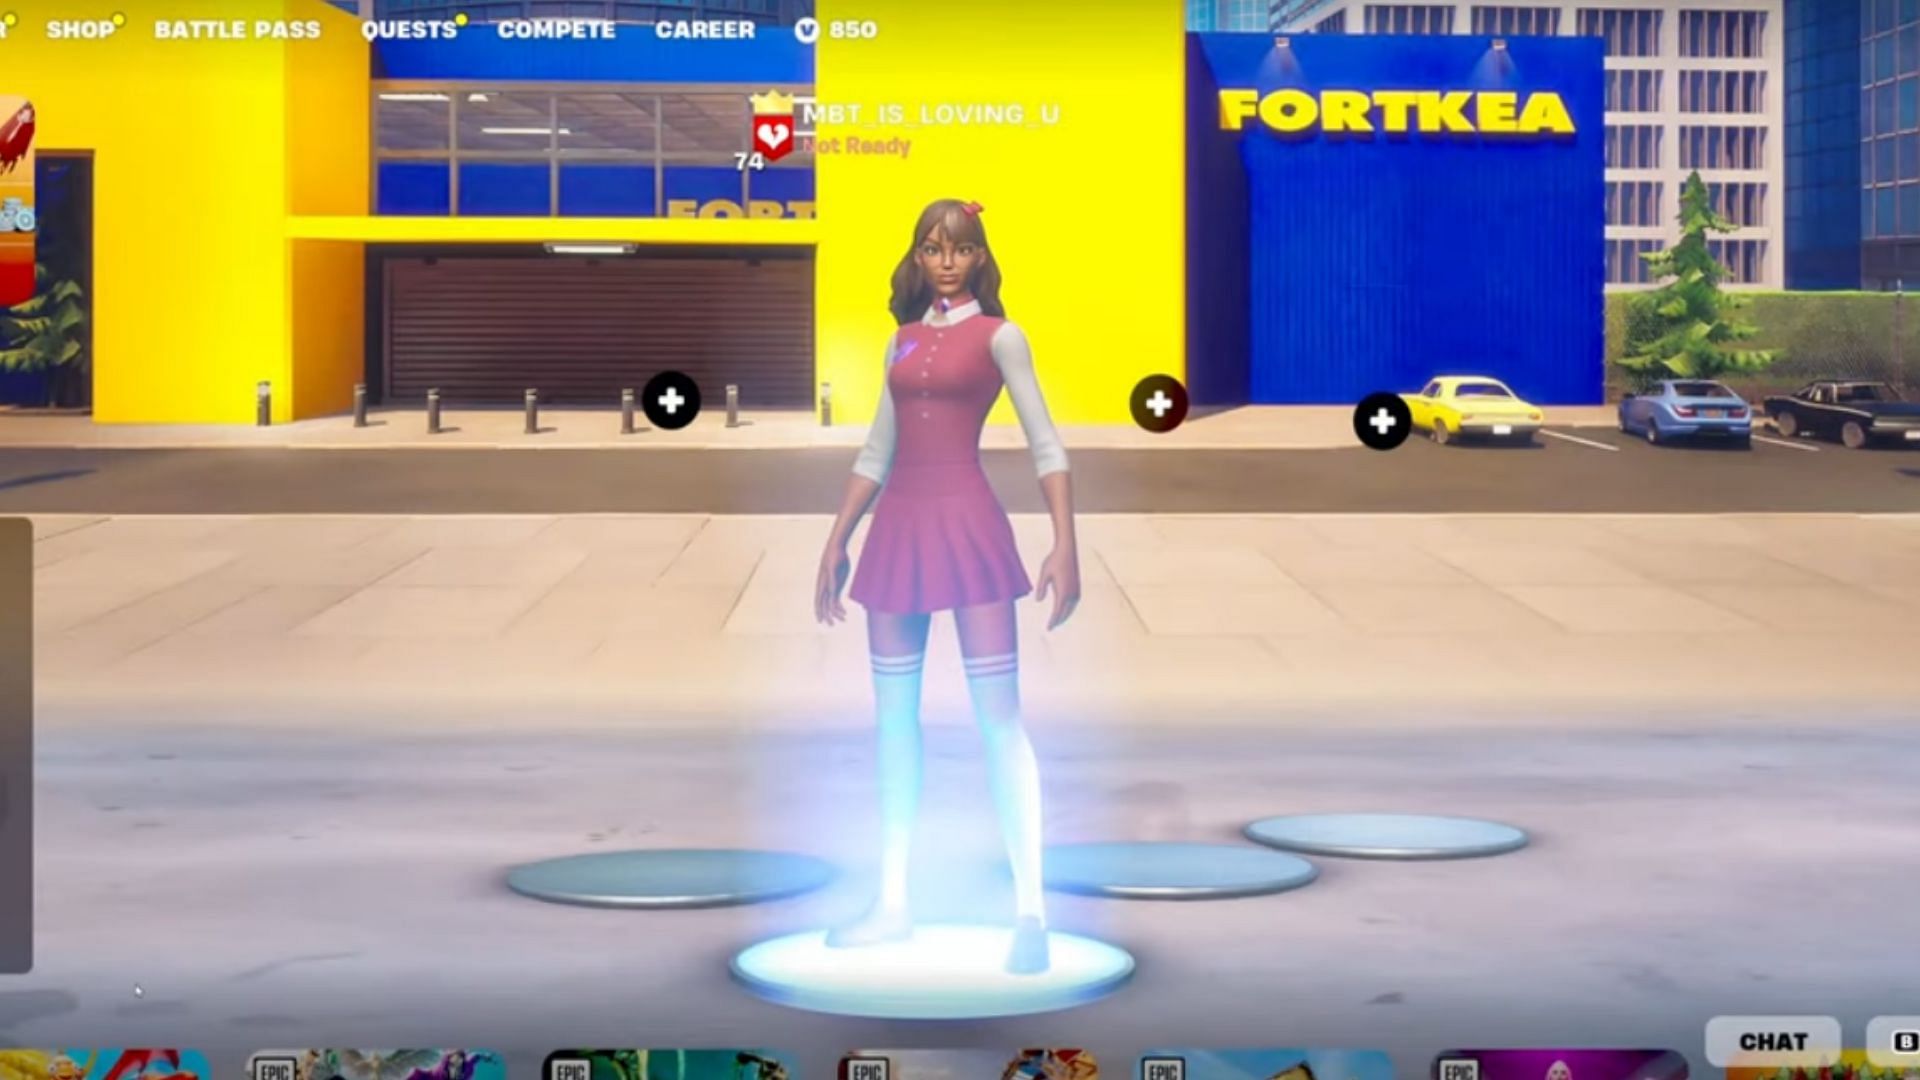 The lobby for the Fortkea Prop Hunt map (Image via MBT on YouTube)